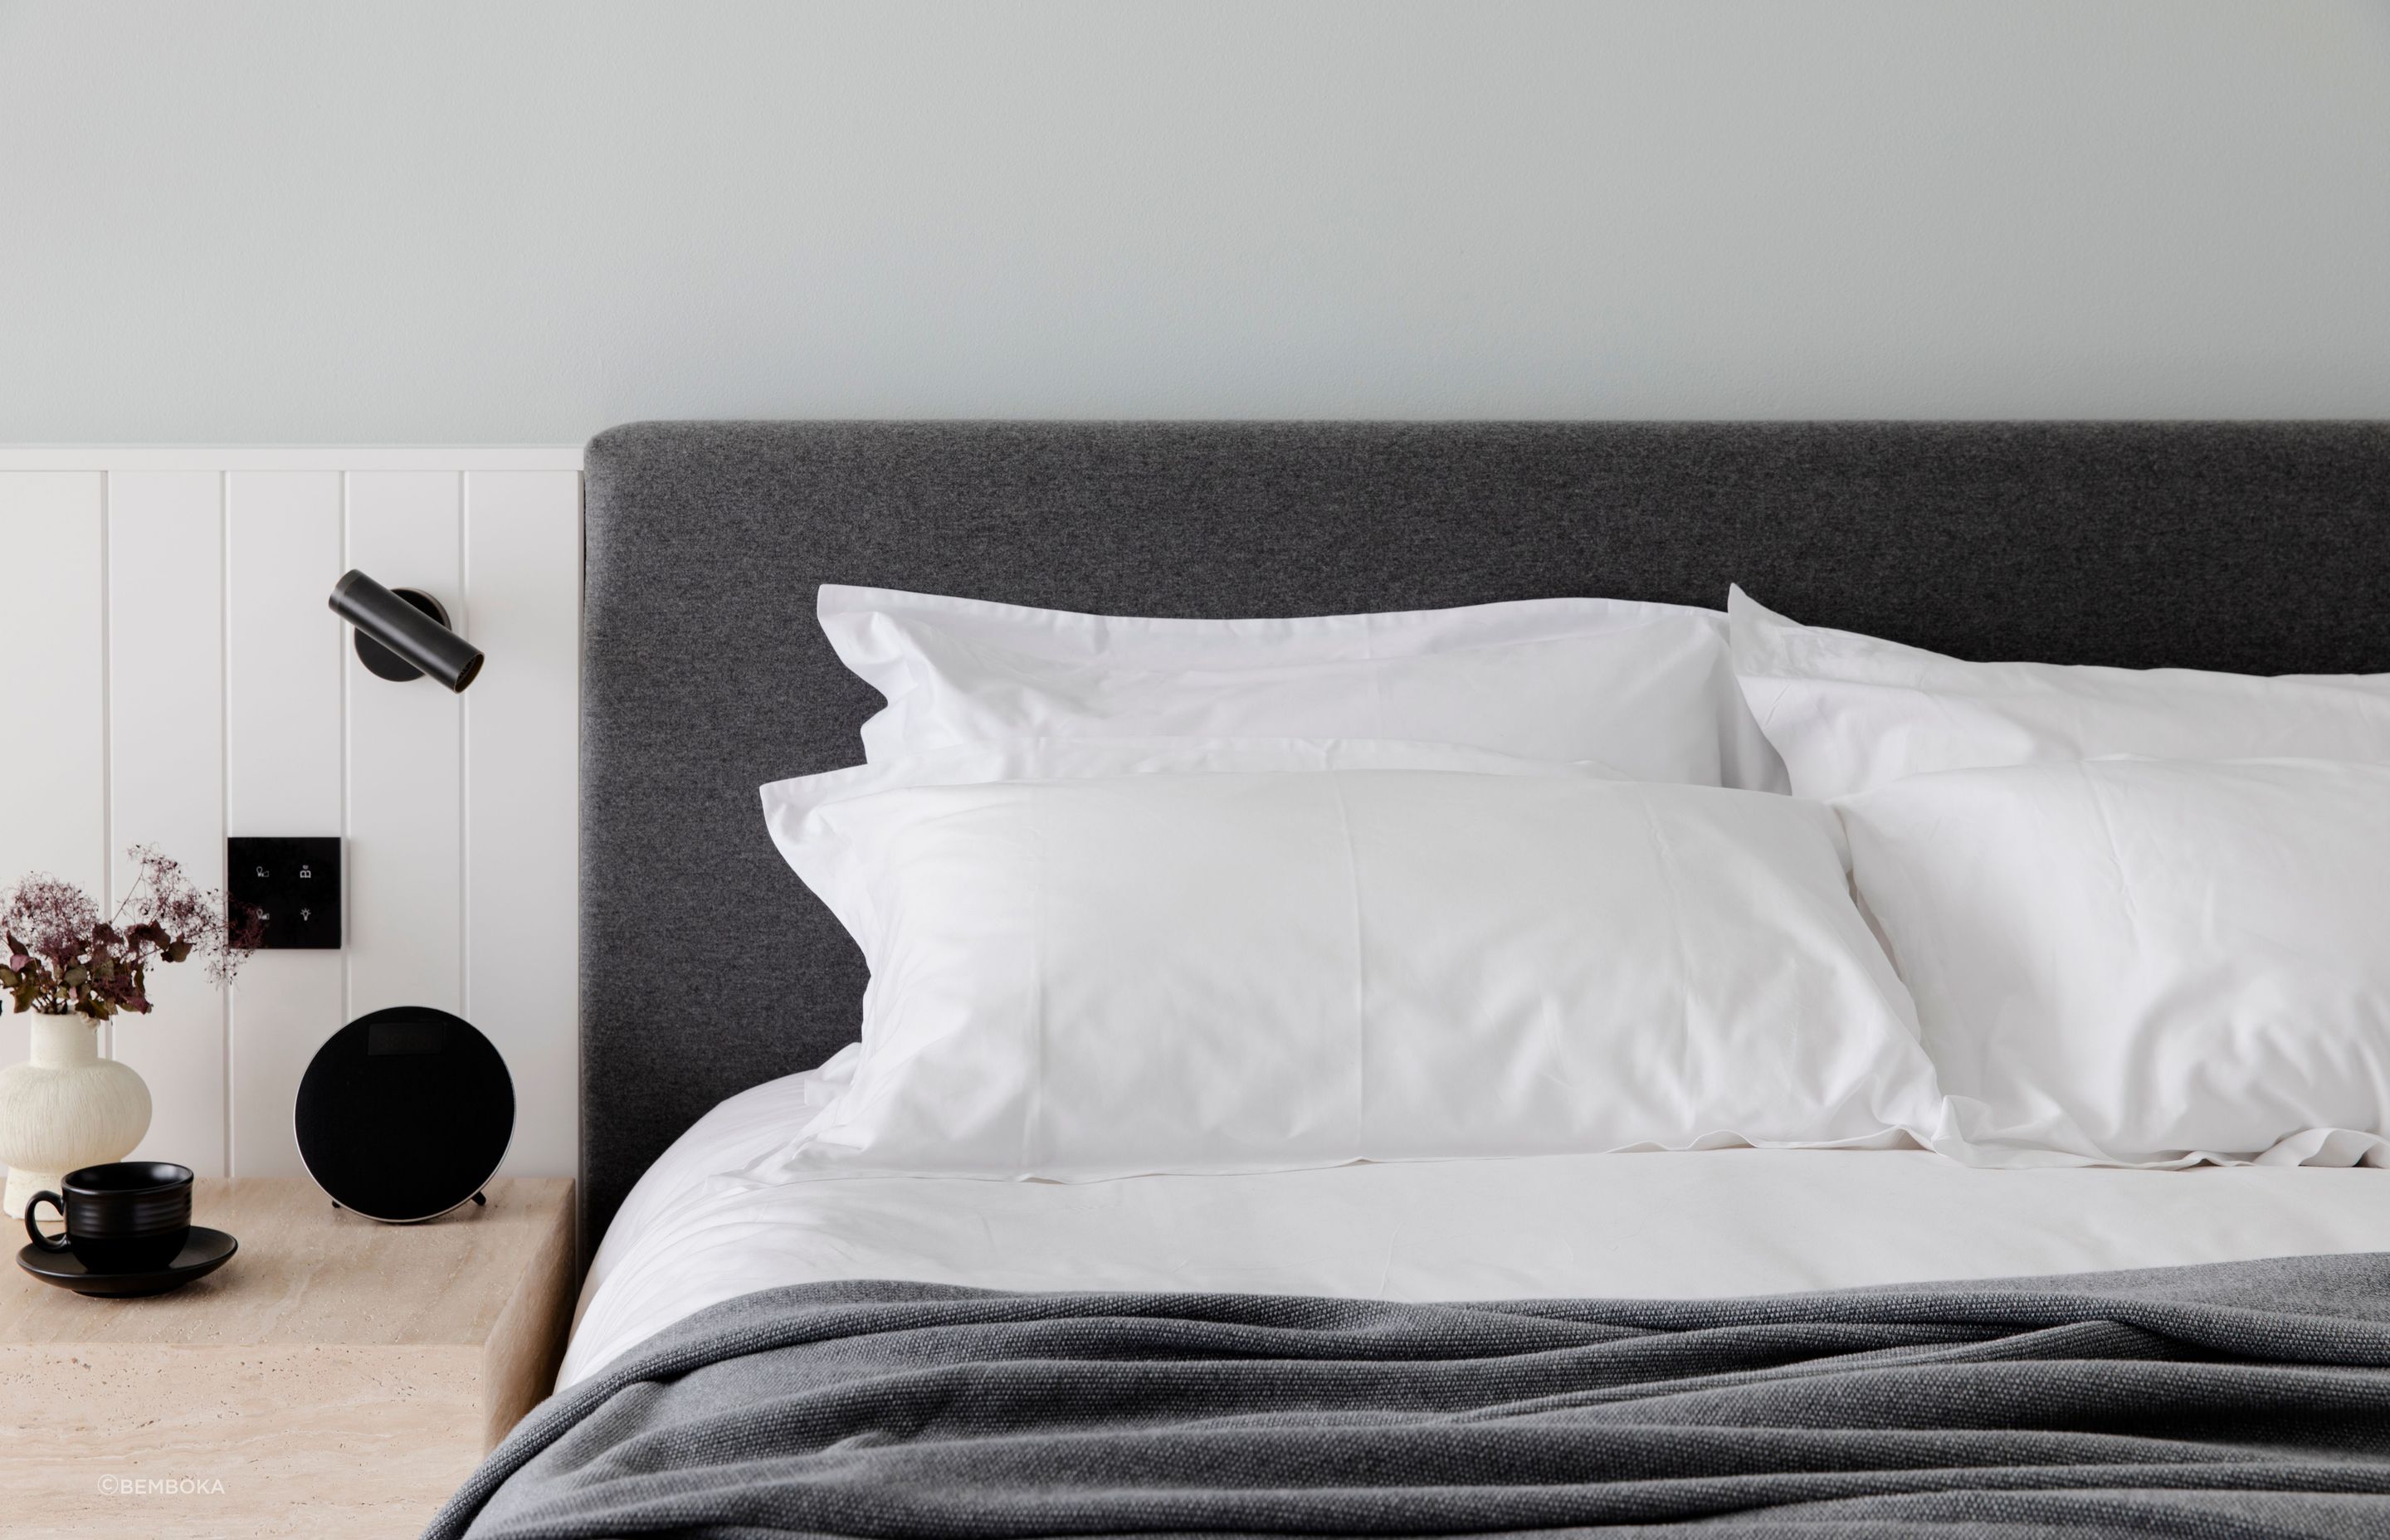 This immaculate setup at the Manly Pacific Hotel shows how contrasting textures in bedding can create a sophistcated look